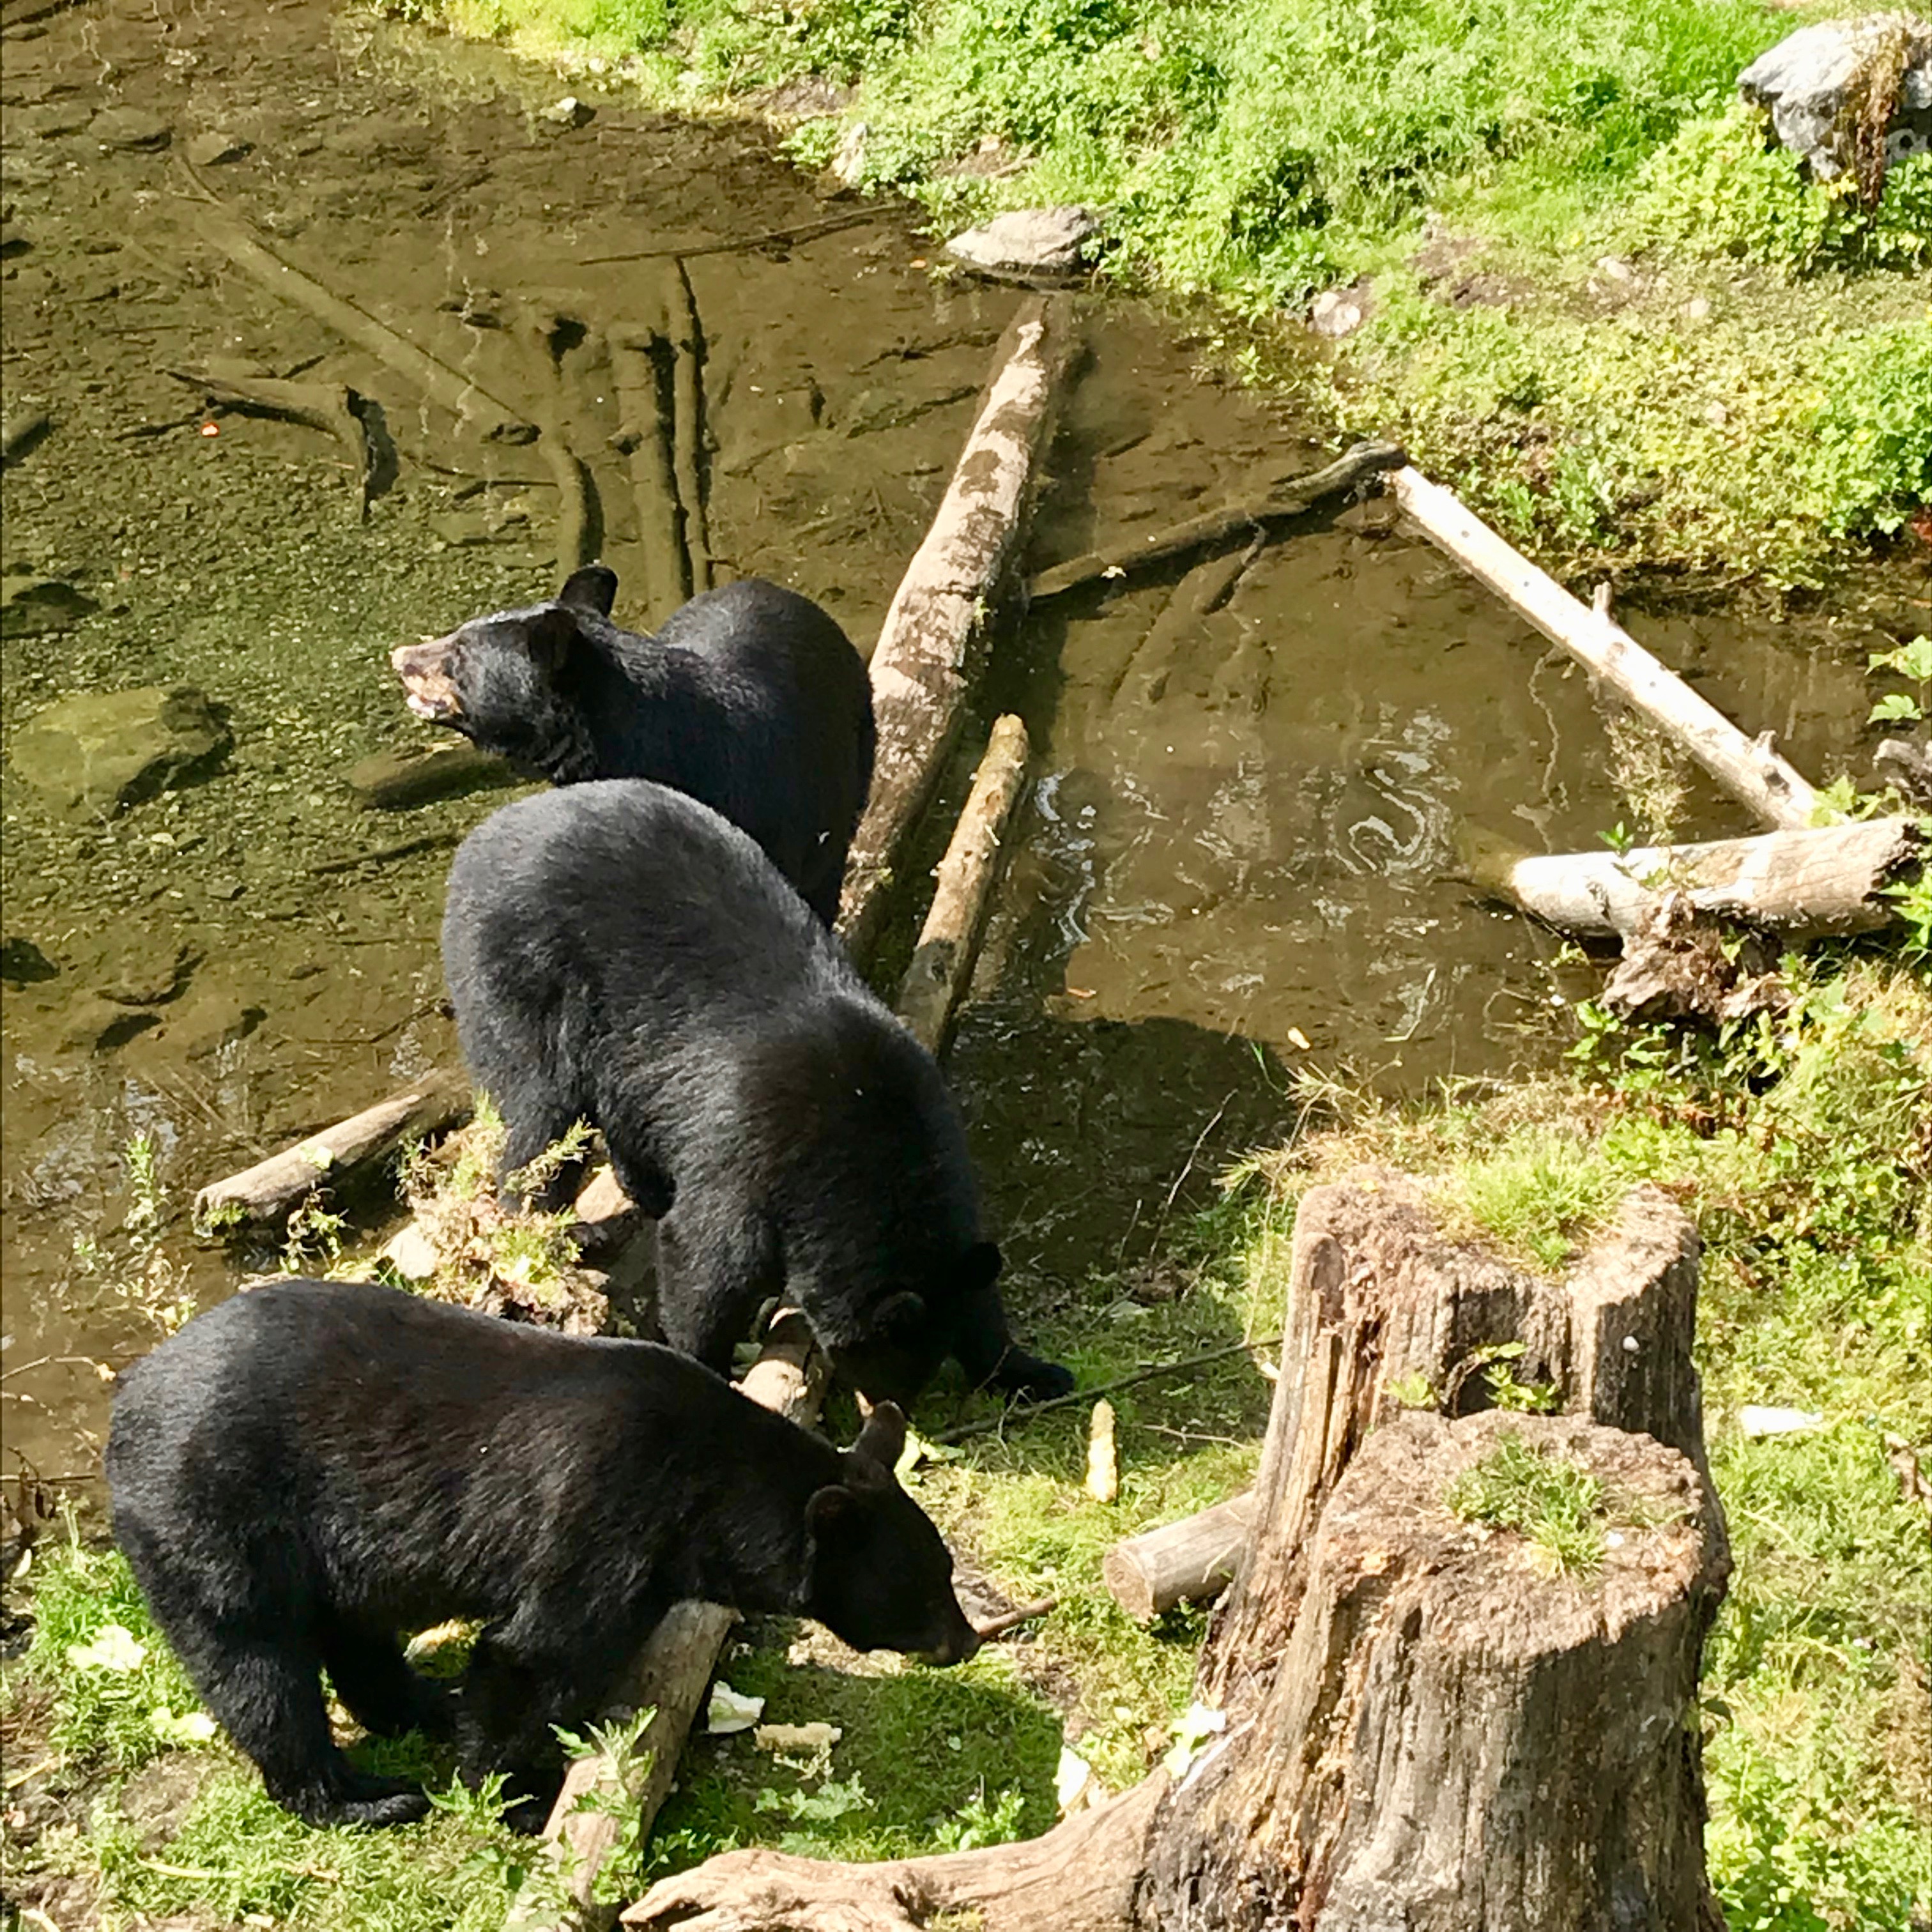 Fortress of the Bears in Sitka, Alaska also has an area for the smaller black bears.